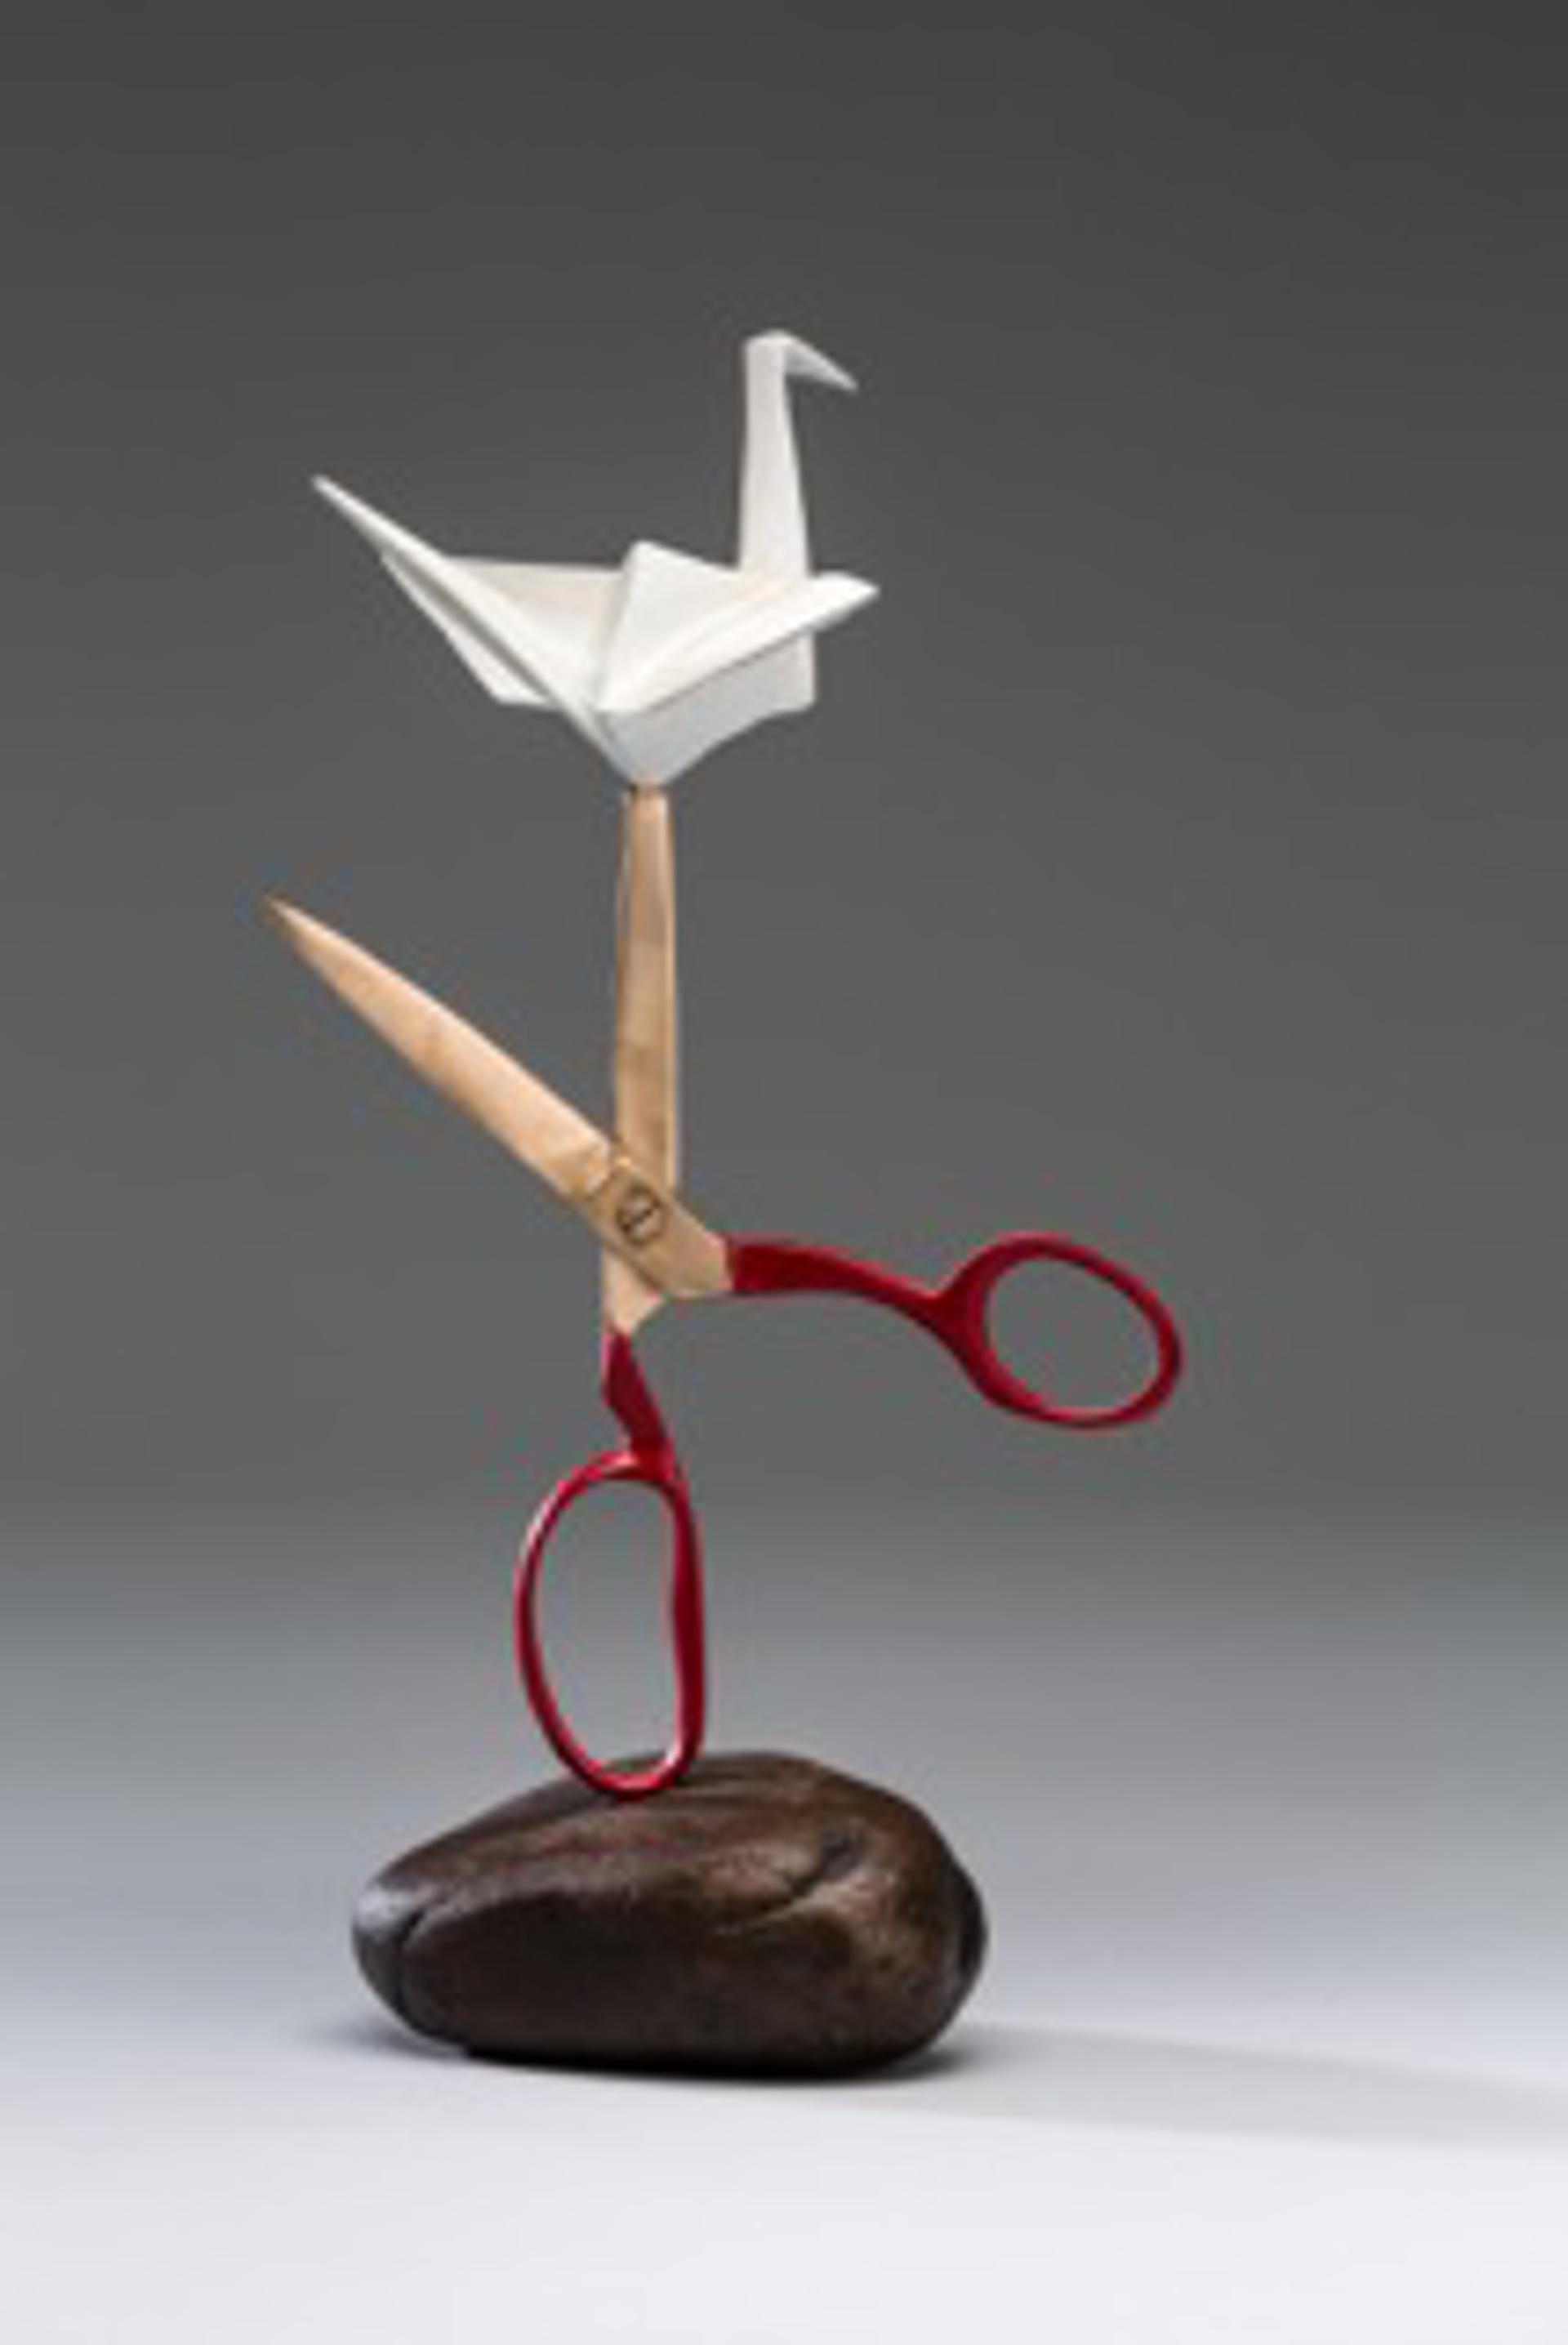 Conversation Peace (Maquette) by Kevin Box